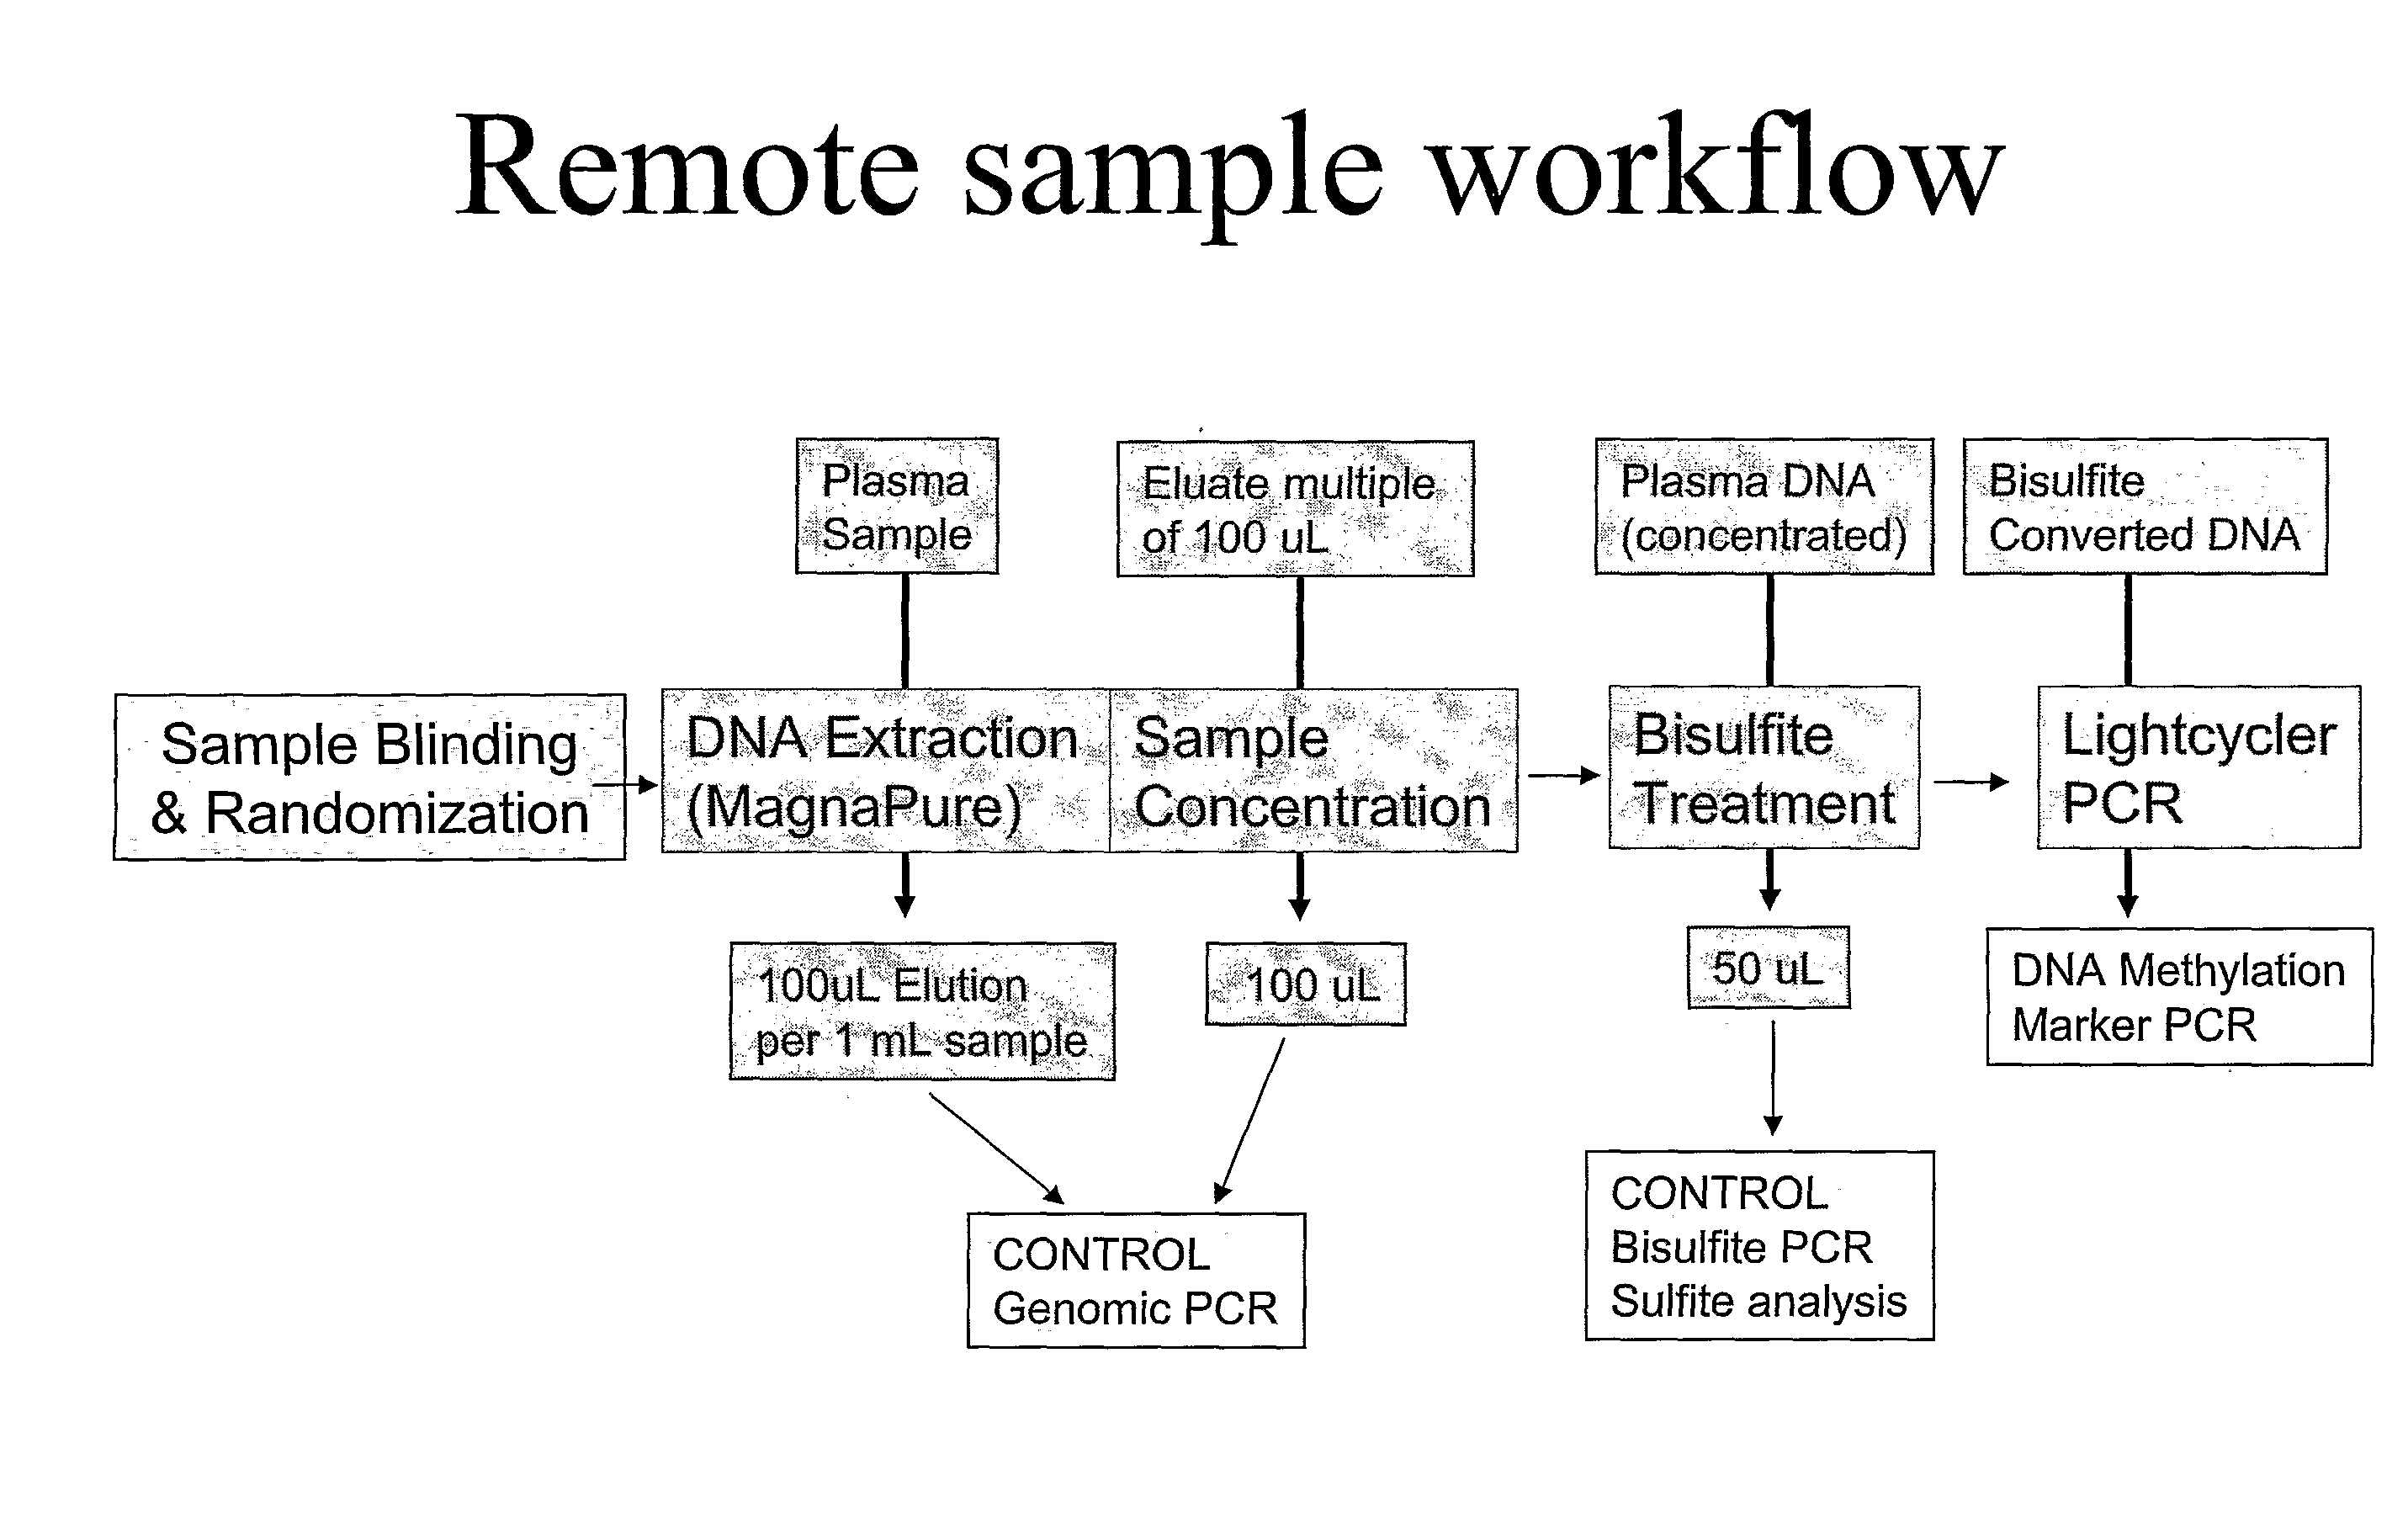 Method for providing DNA fragments derived from a remote sample